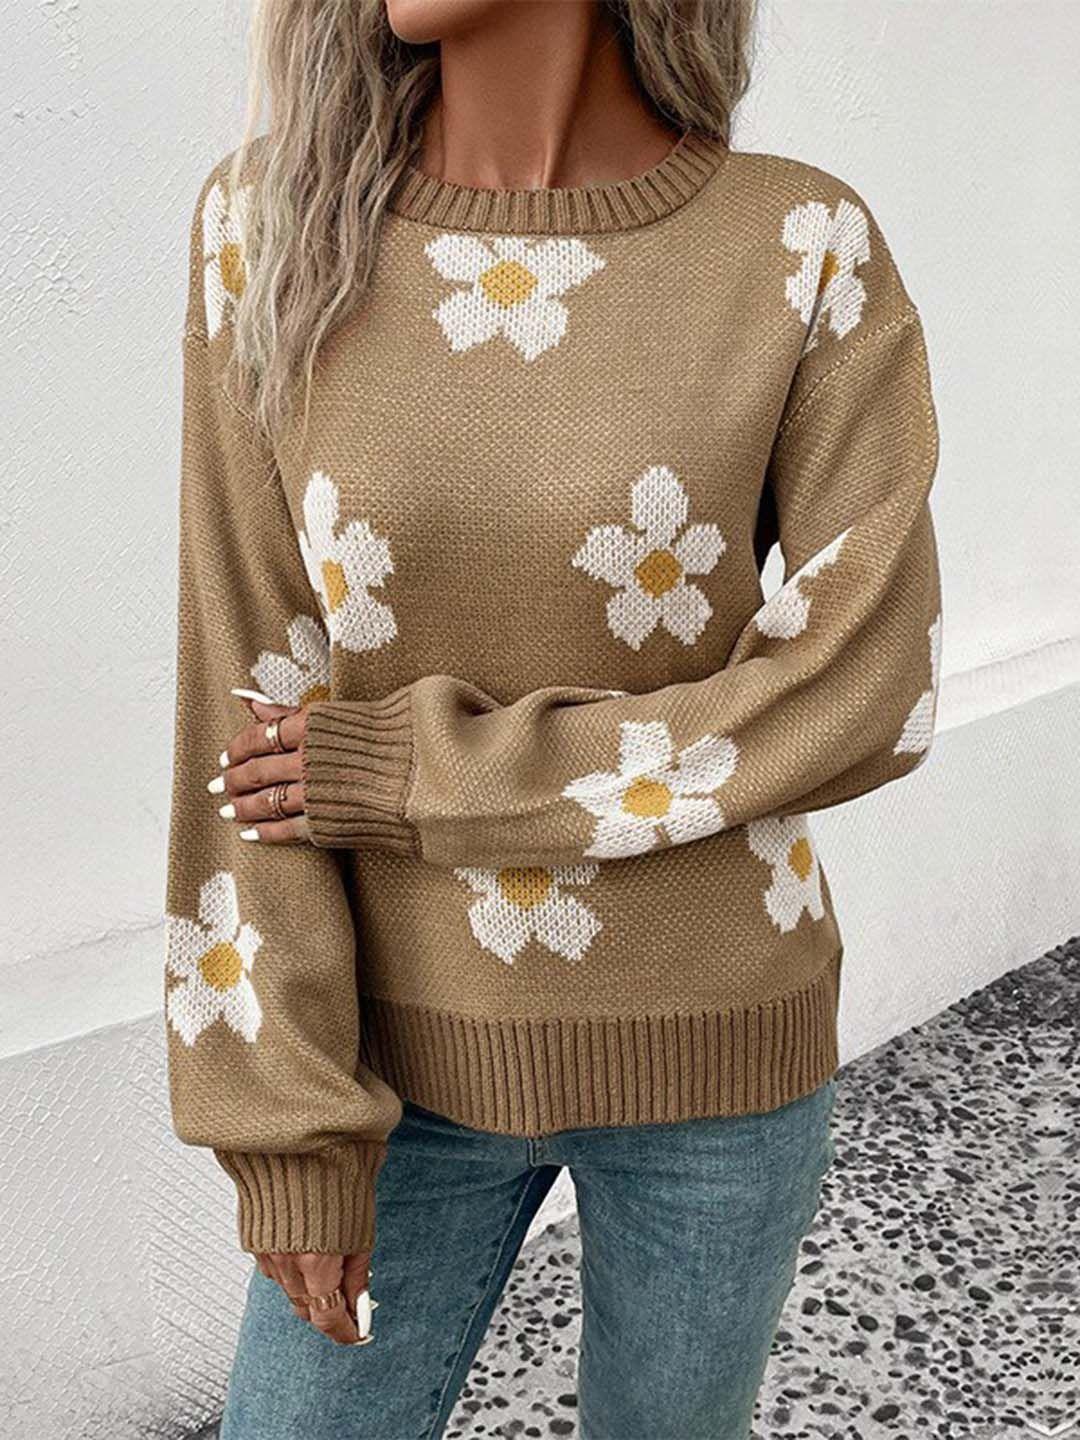 stylecast floral printed pullover